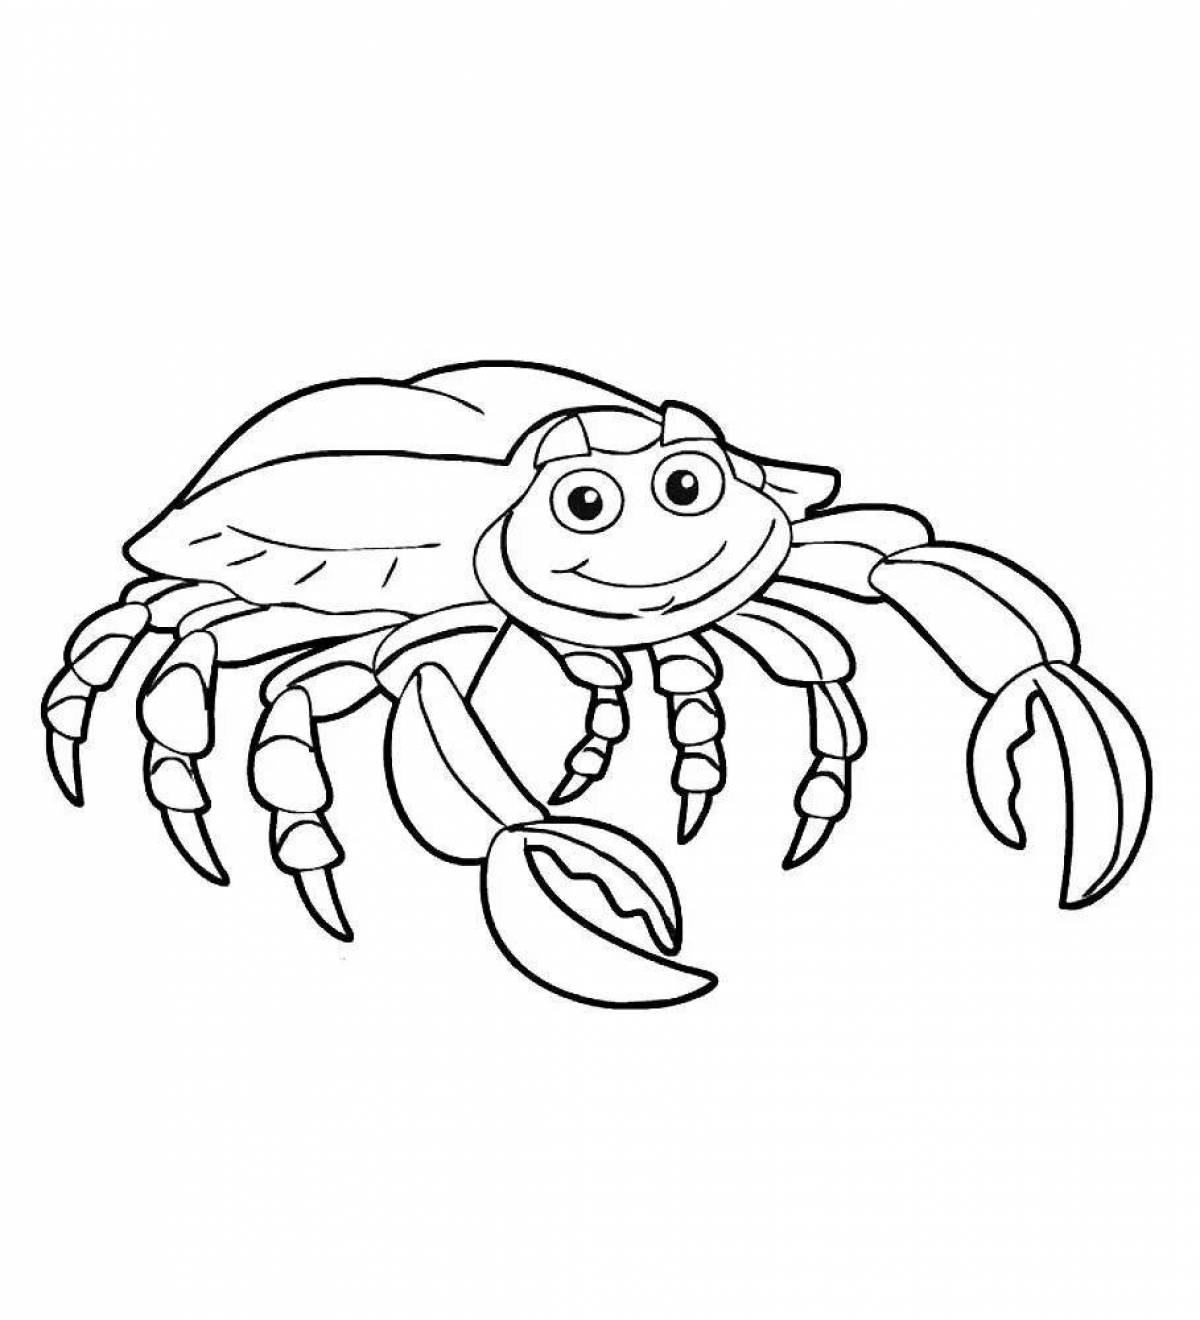 Crab for kids #13